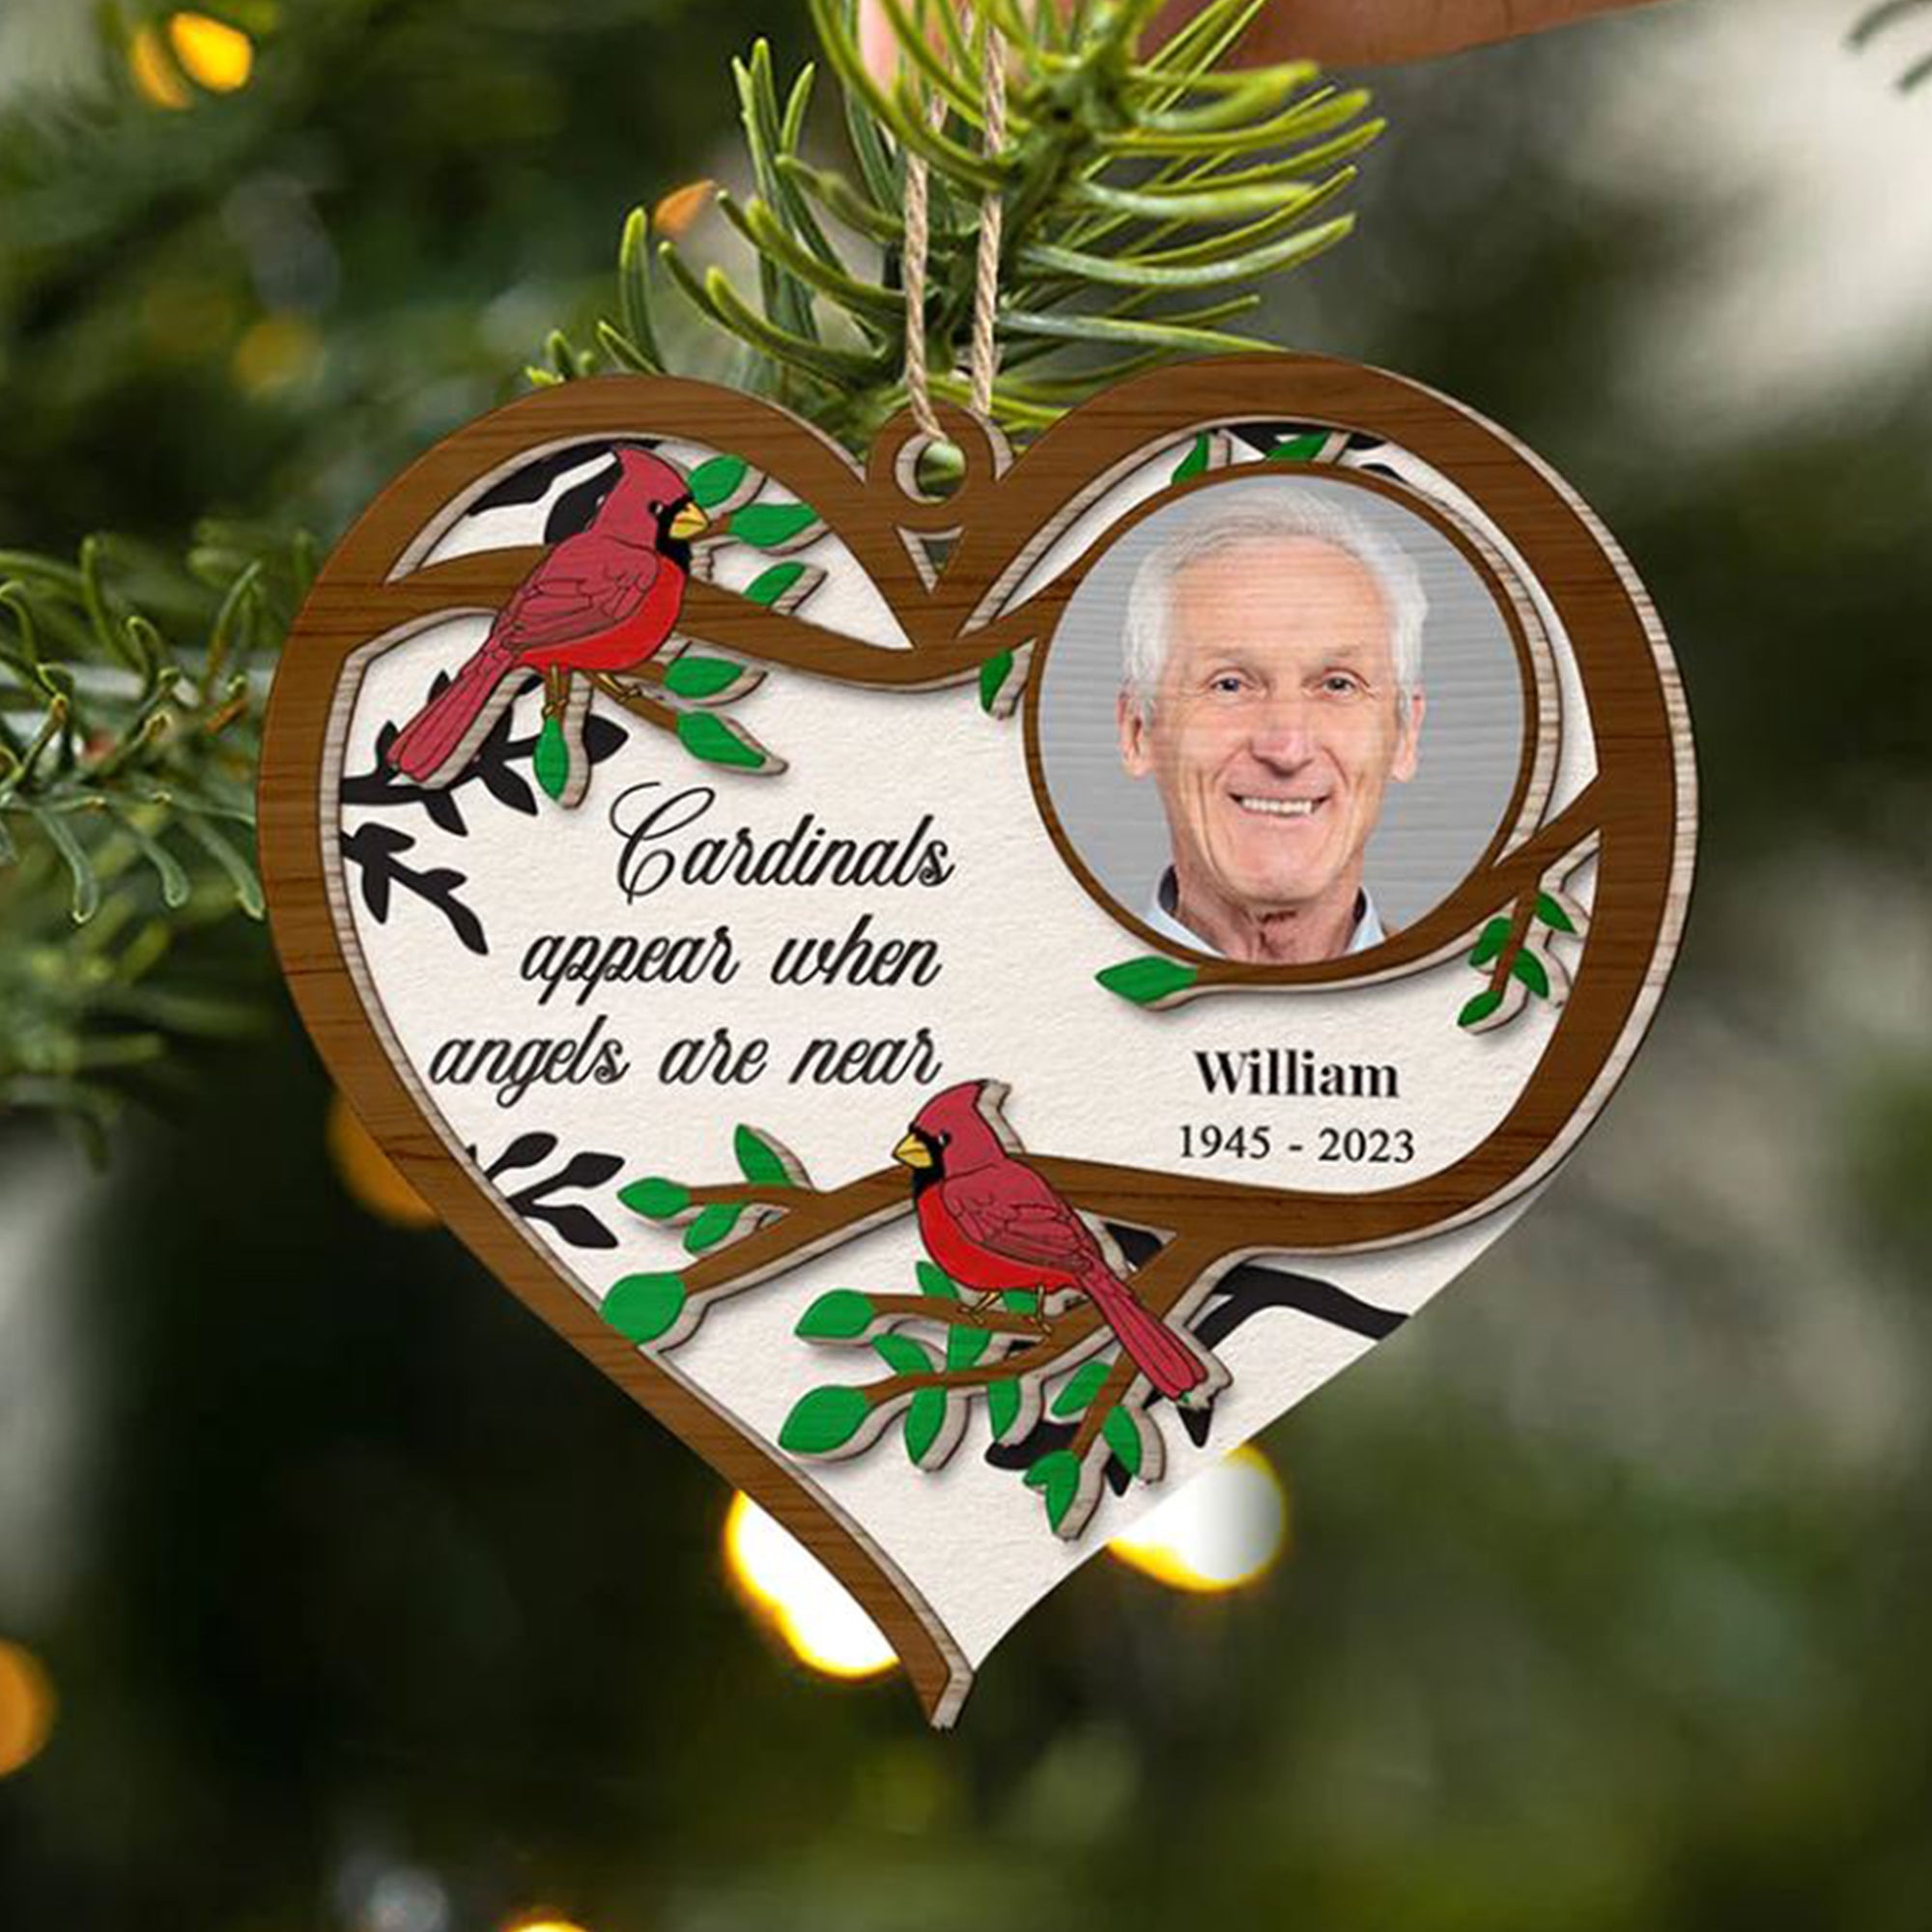 I Will Always With You, Custom Photo And Name - Personalized Custom Shaped Wooden Ornament - Gift For Family, Memorial Gift